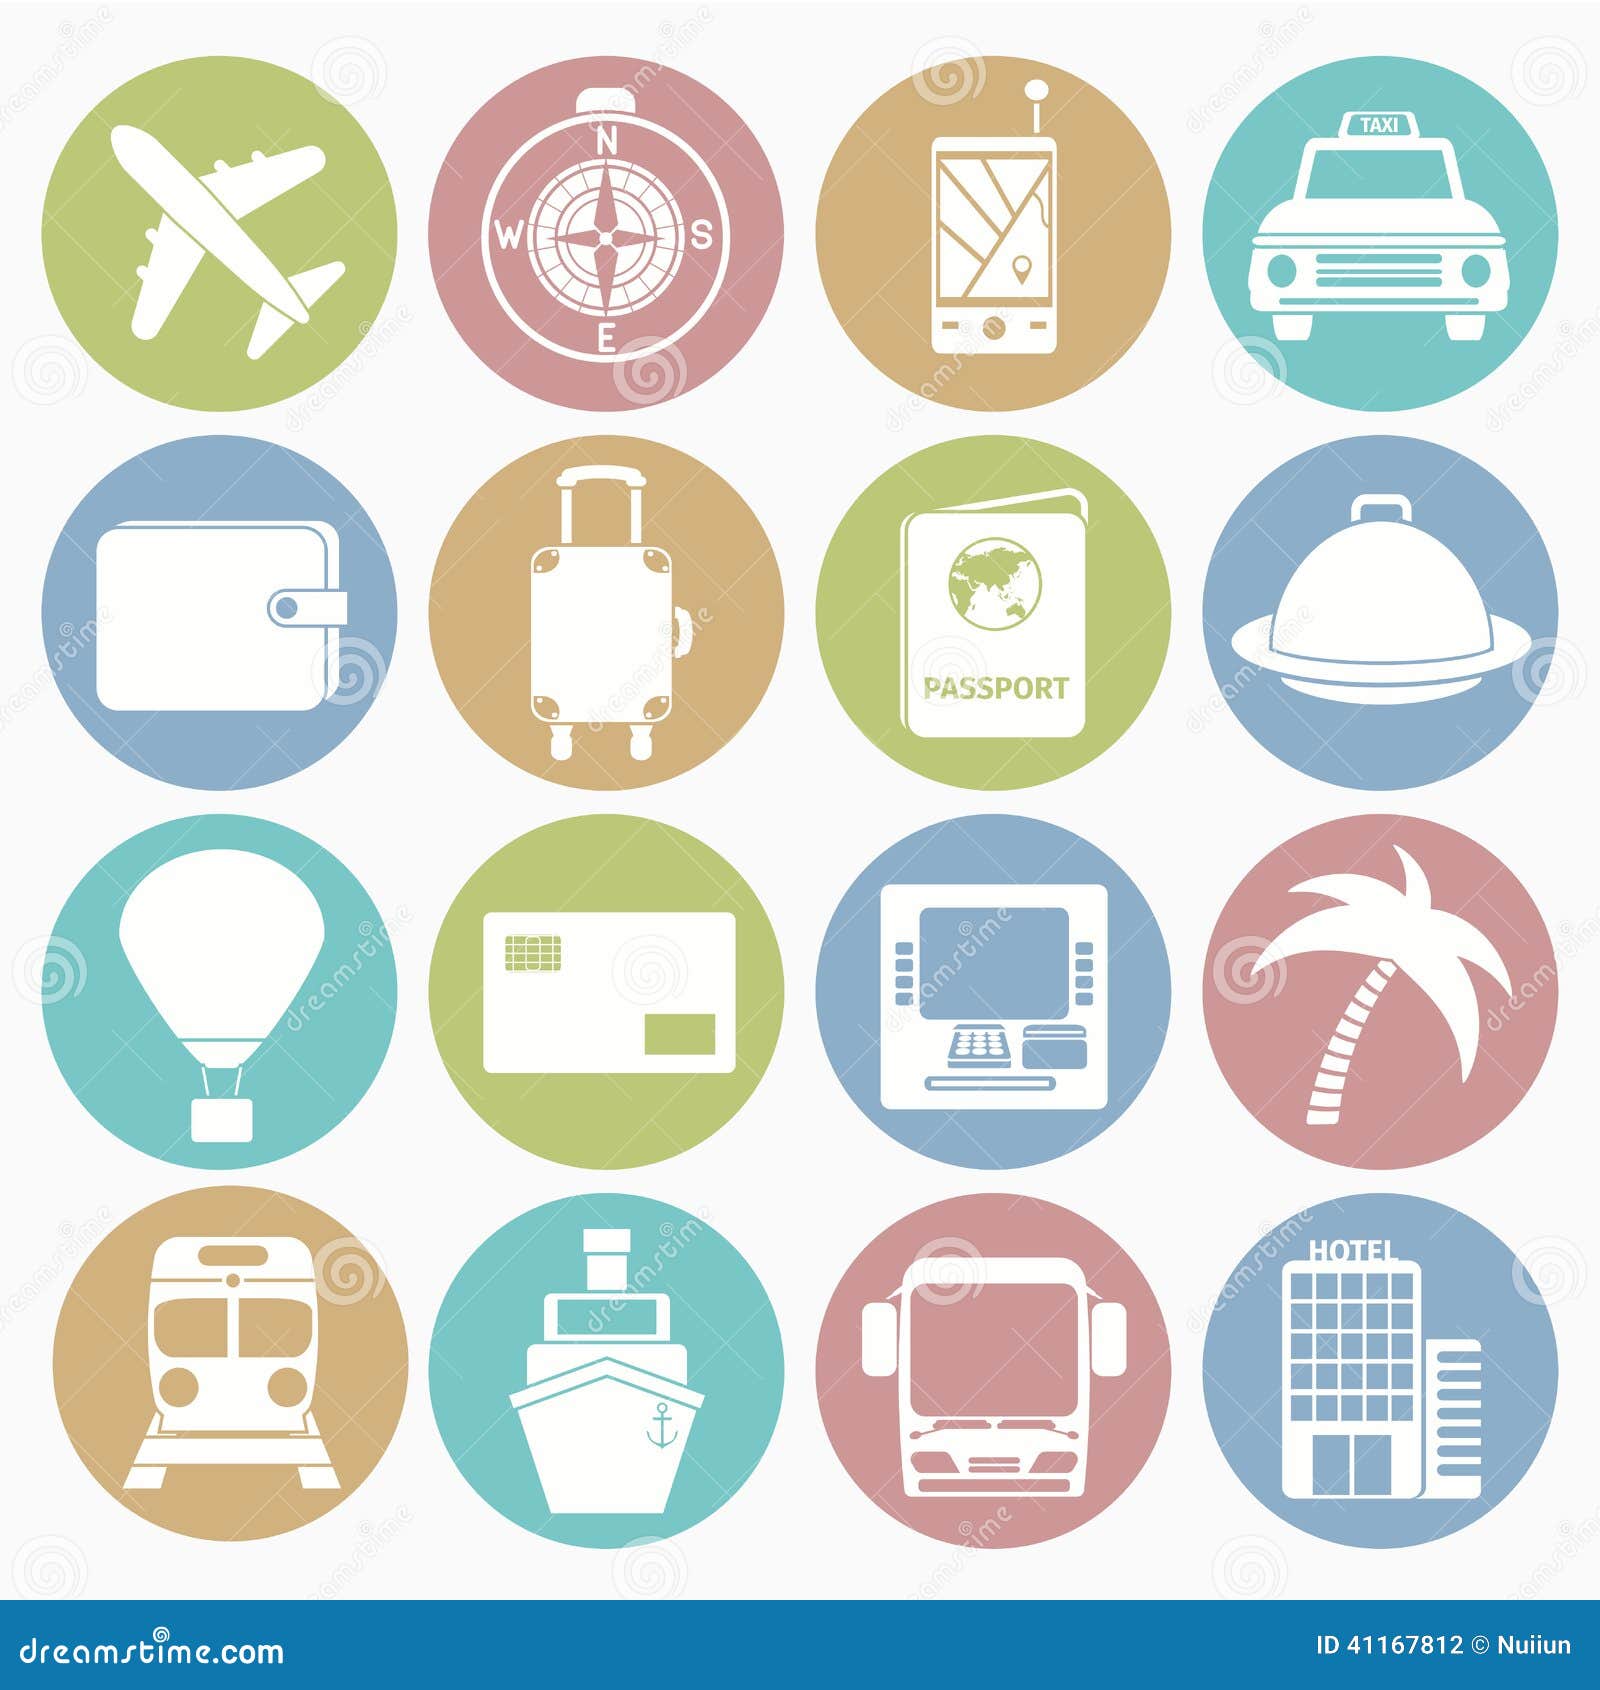 Travel icons set stock vector. Illustration of holiday - 41167812